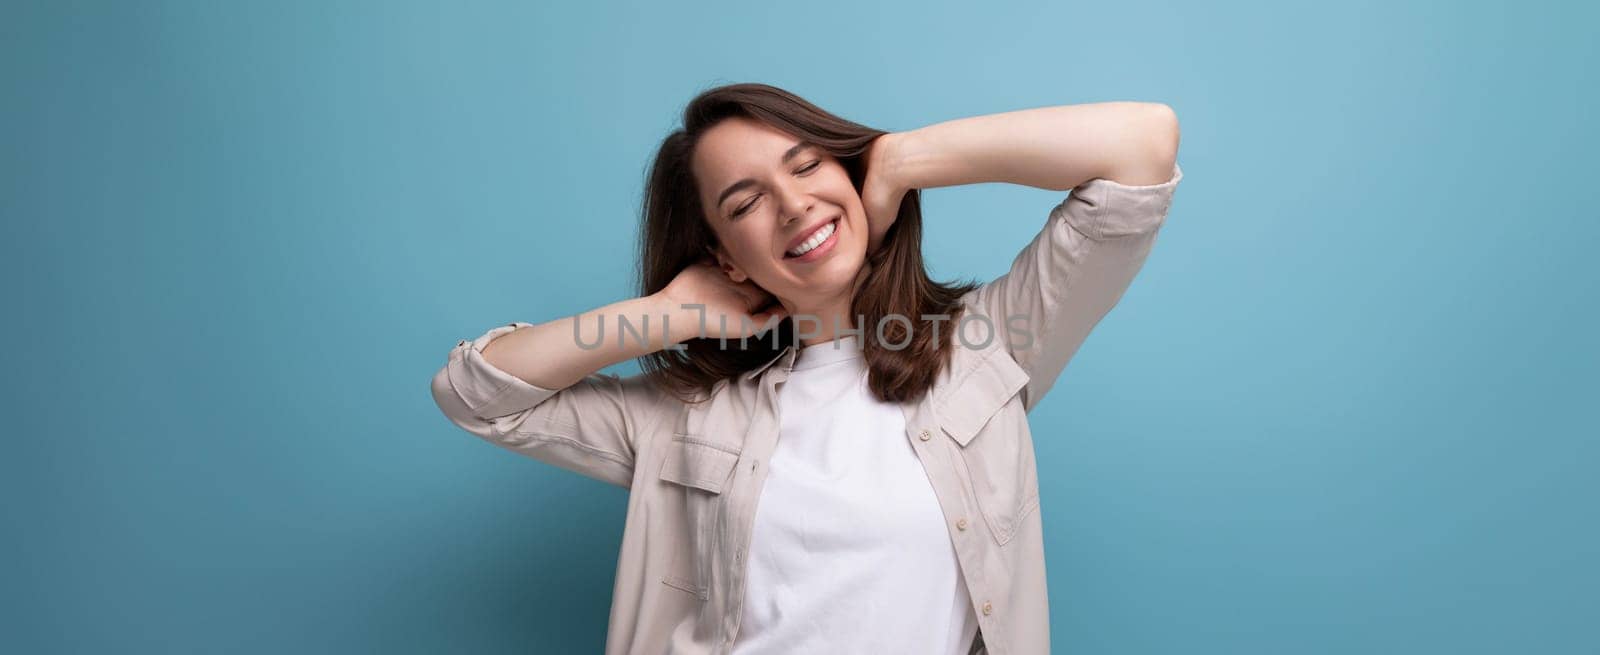 pretty 25 year old woman in a casual look smiles cutely on a blue background by TRMK